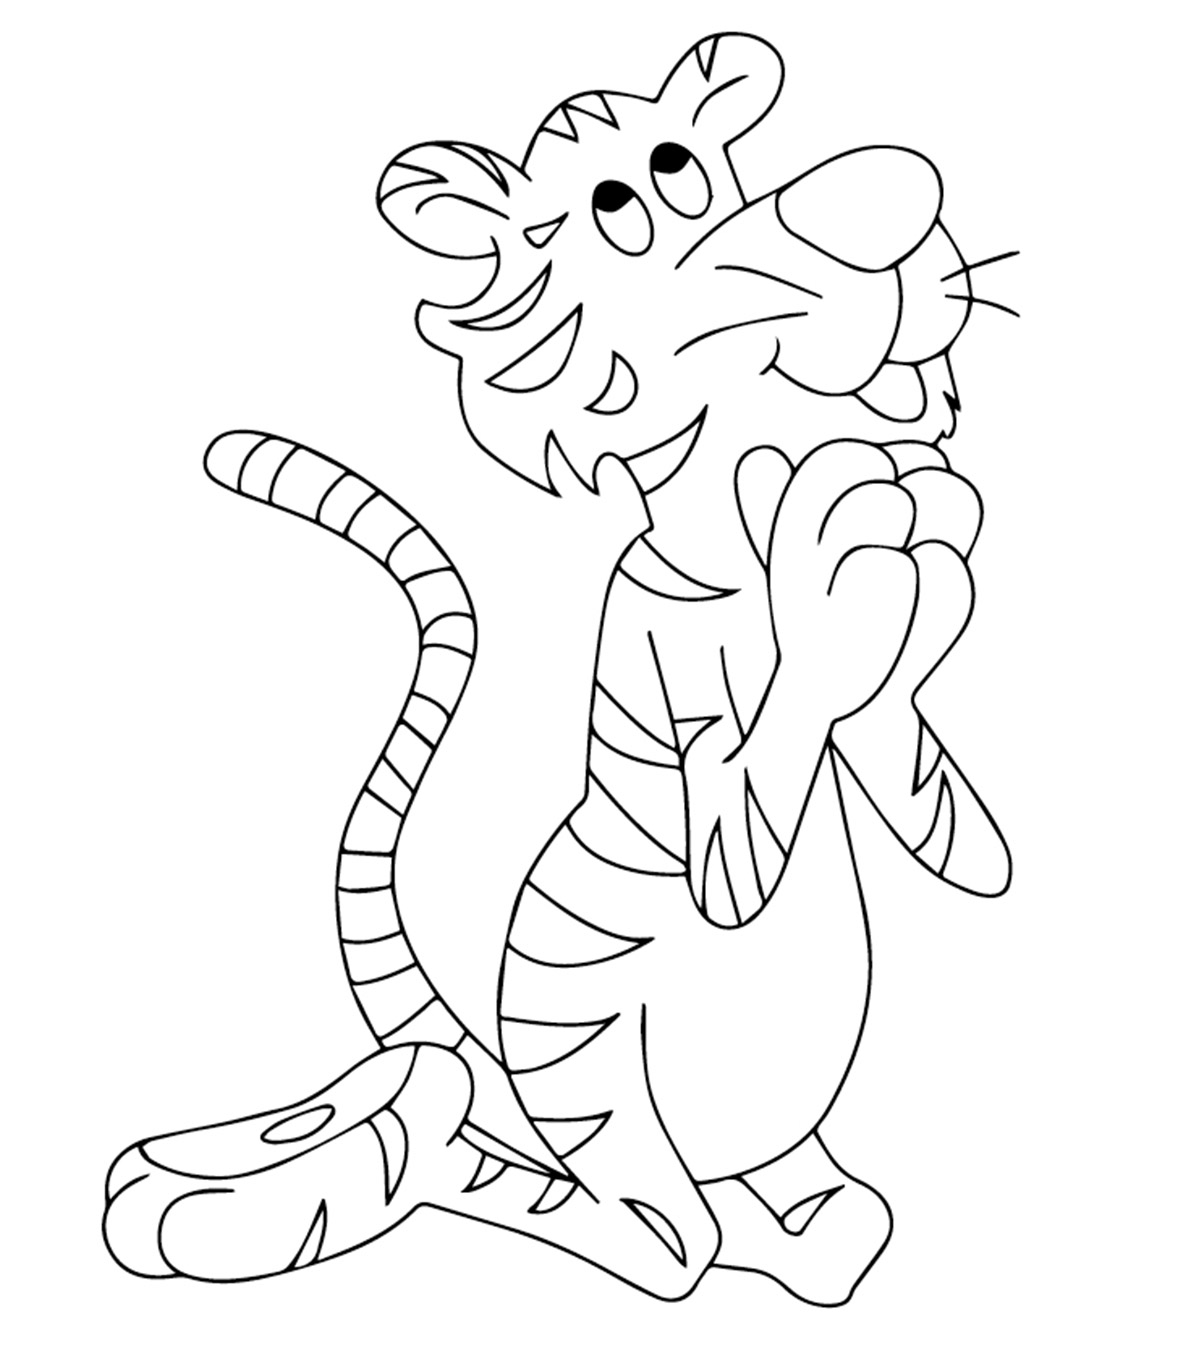 Top 20 Tiger Coloring Pages For Your Little Ones